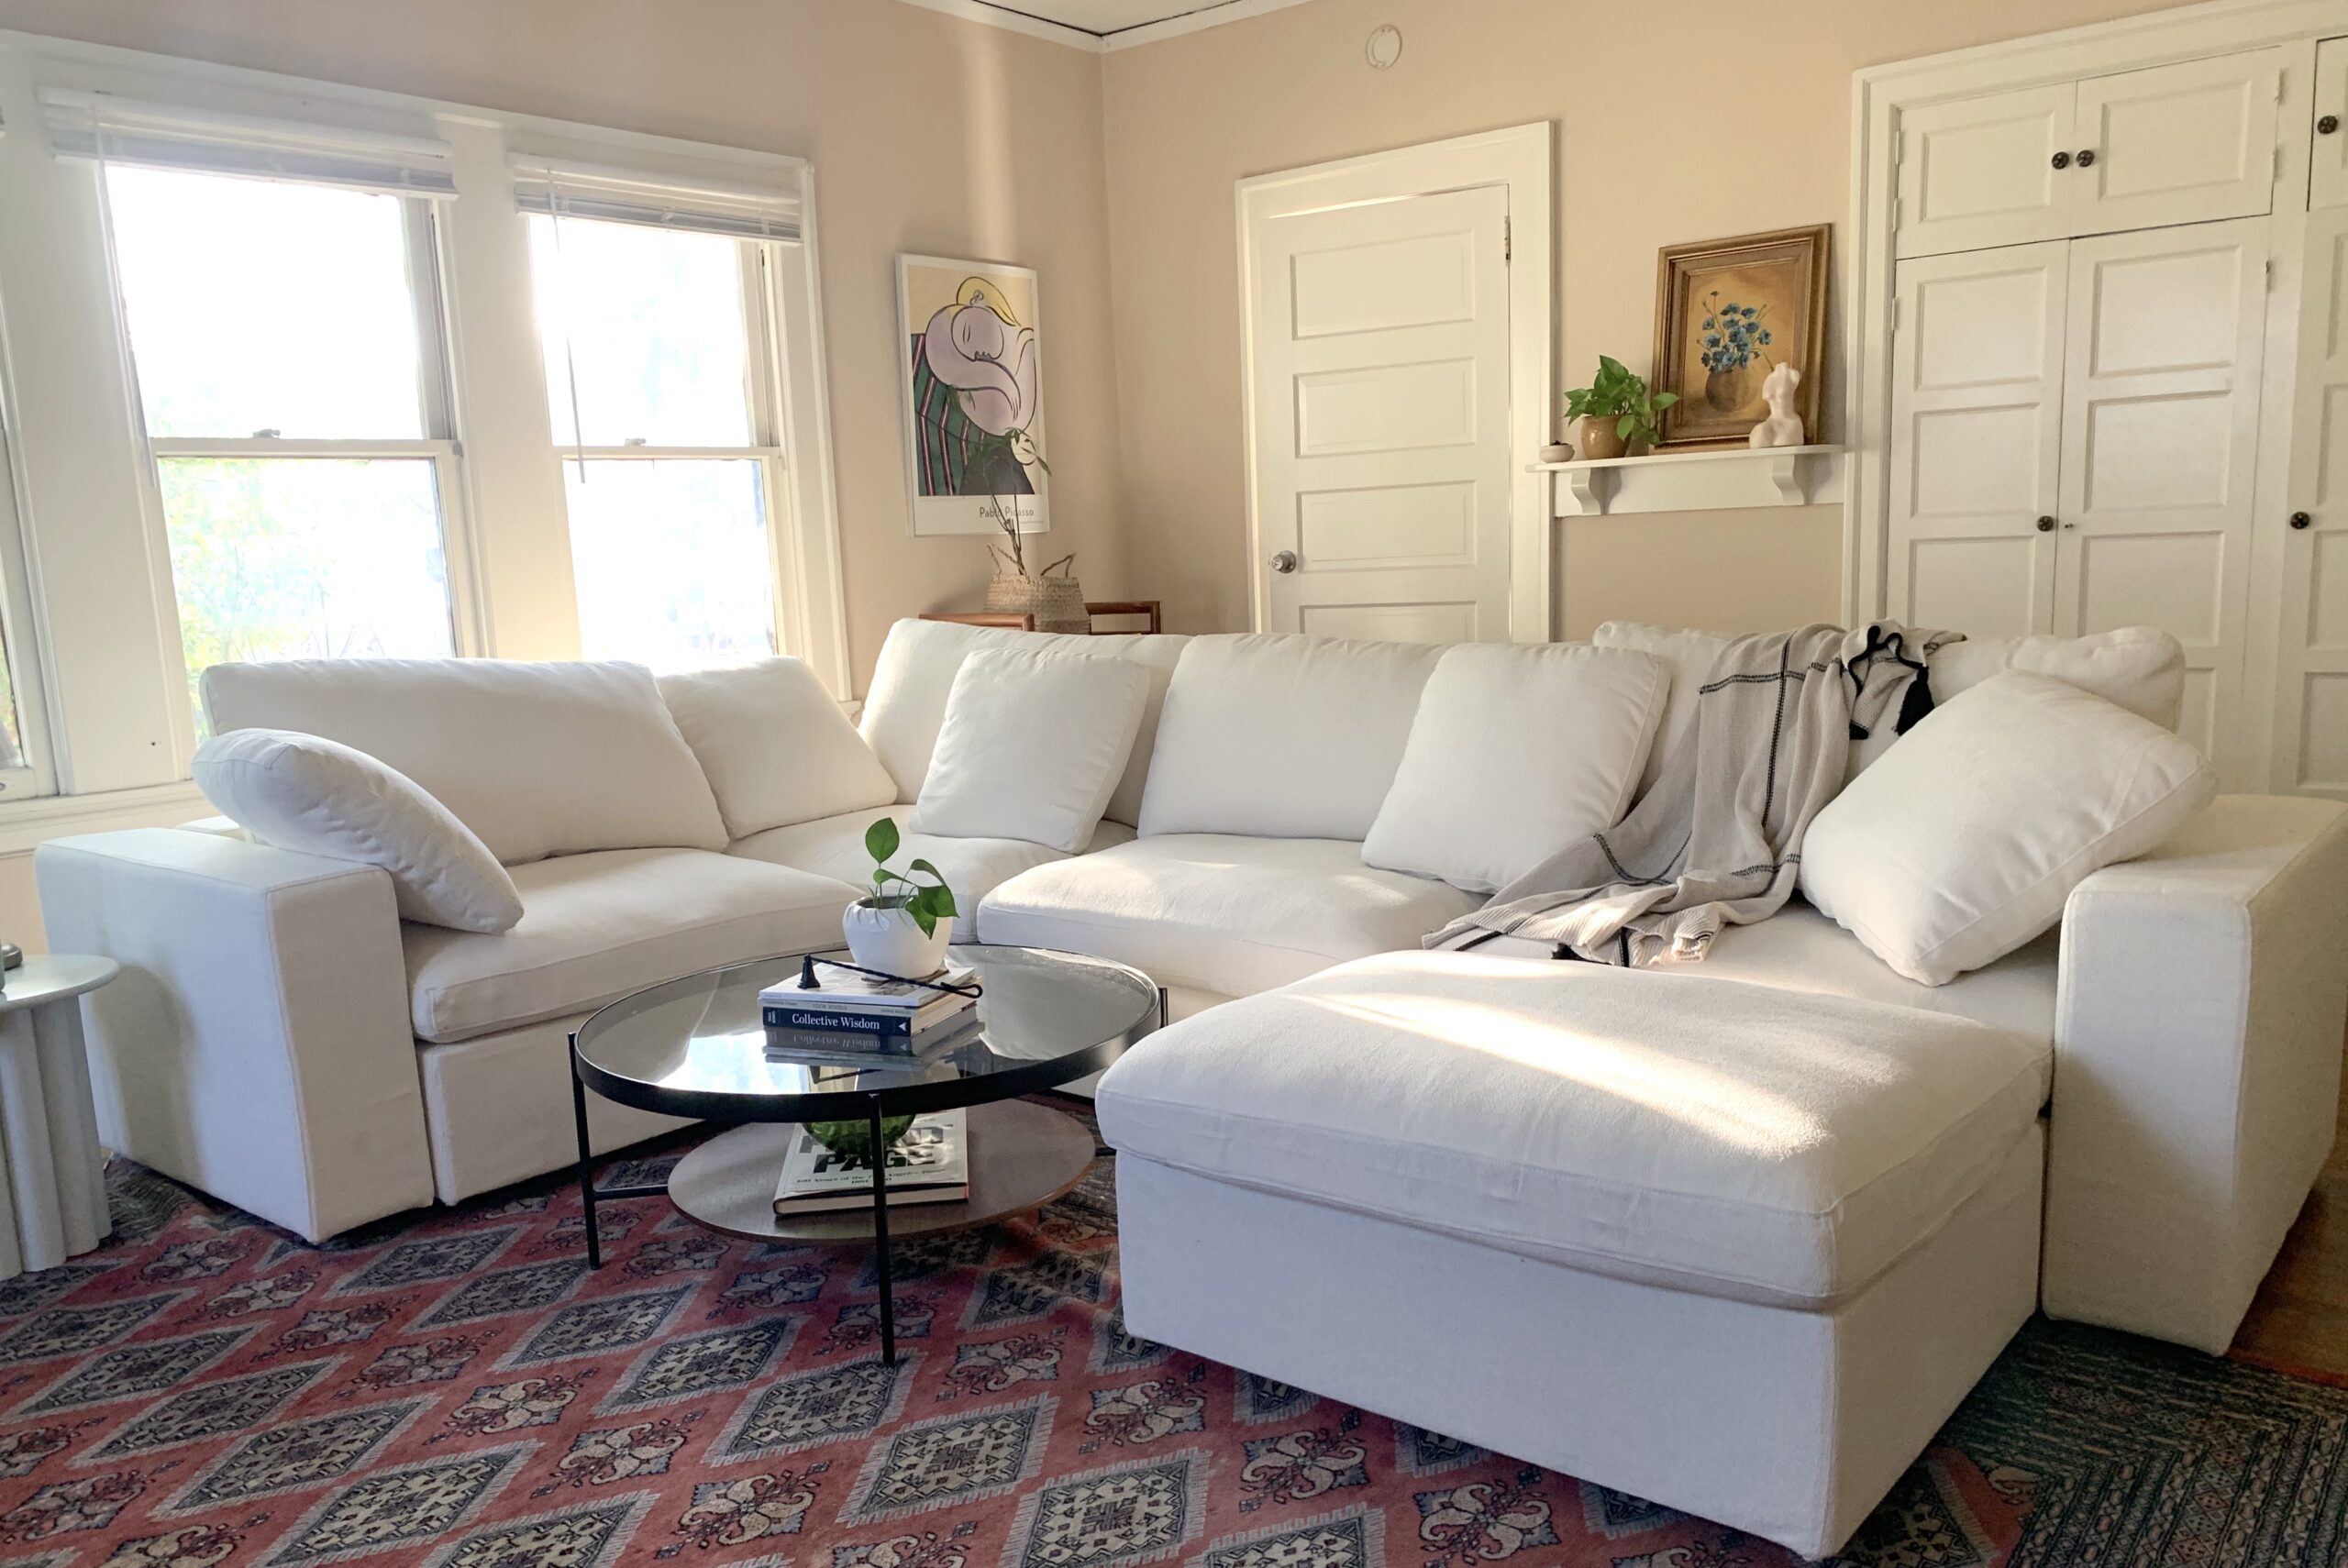 The 7th Avenue 4-seat Modular corner sectional in white, set up in our editor's living room.